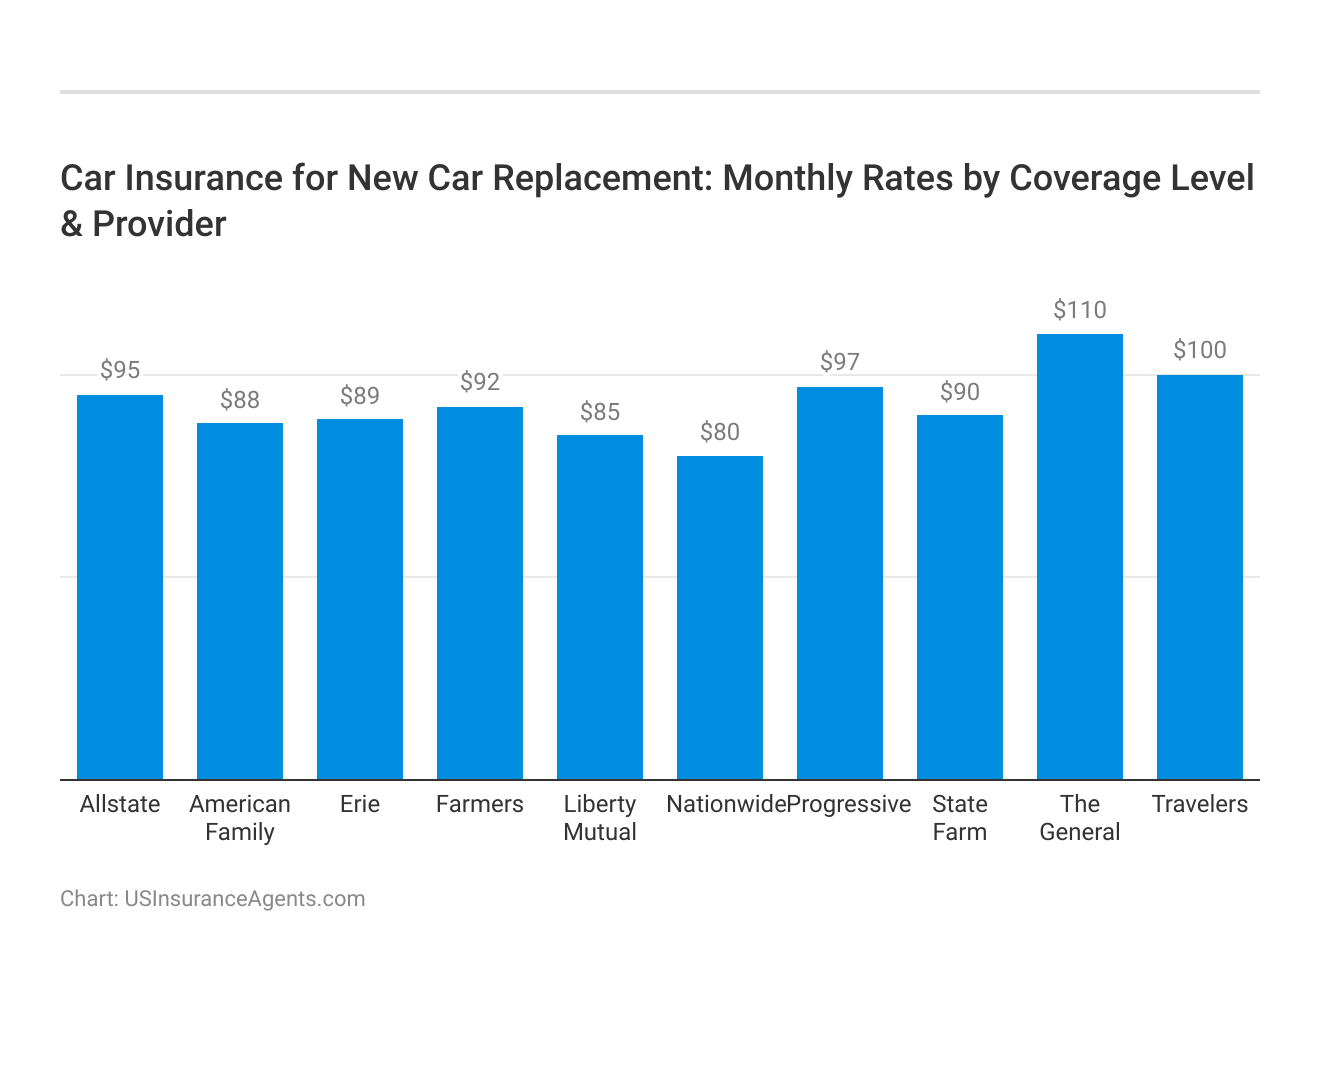 <h3>Car Insurance for New Car Replacement: Monthly Rates by Coverage Level & Provider</h3>